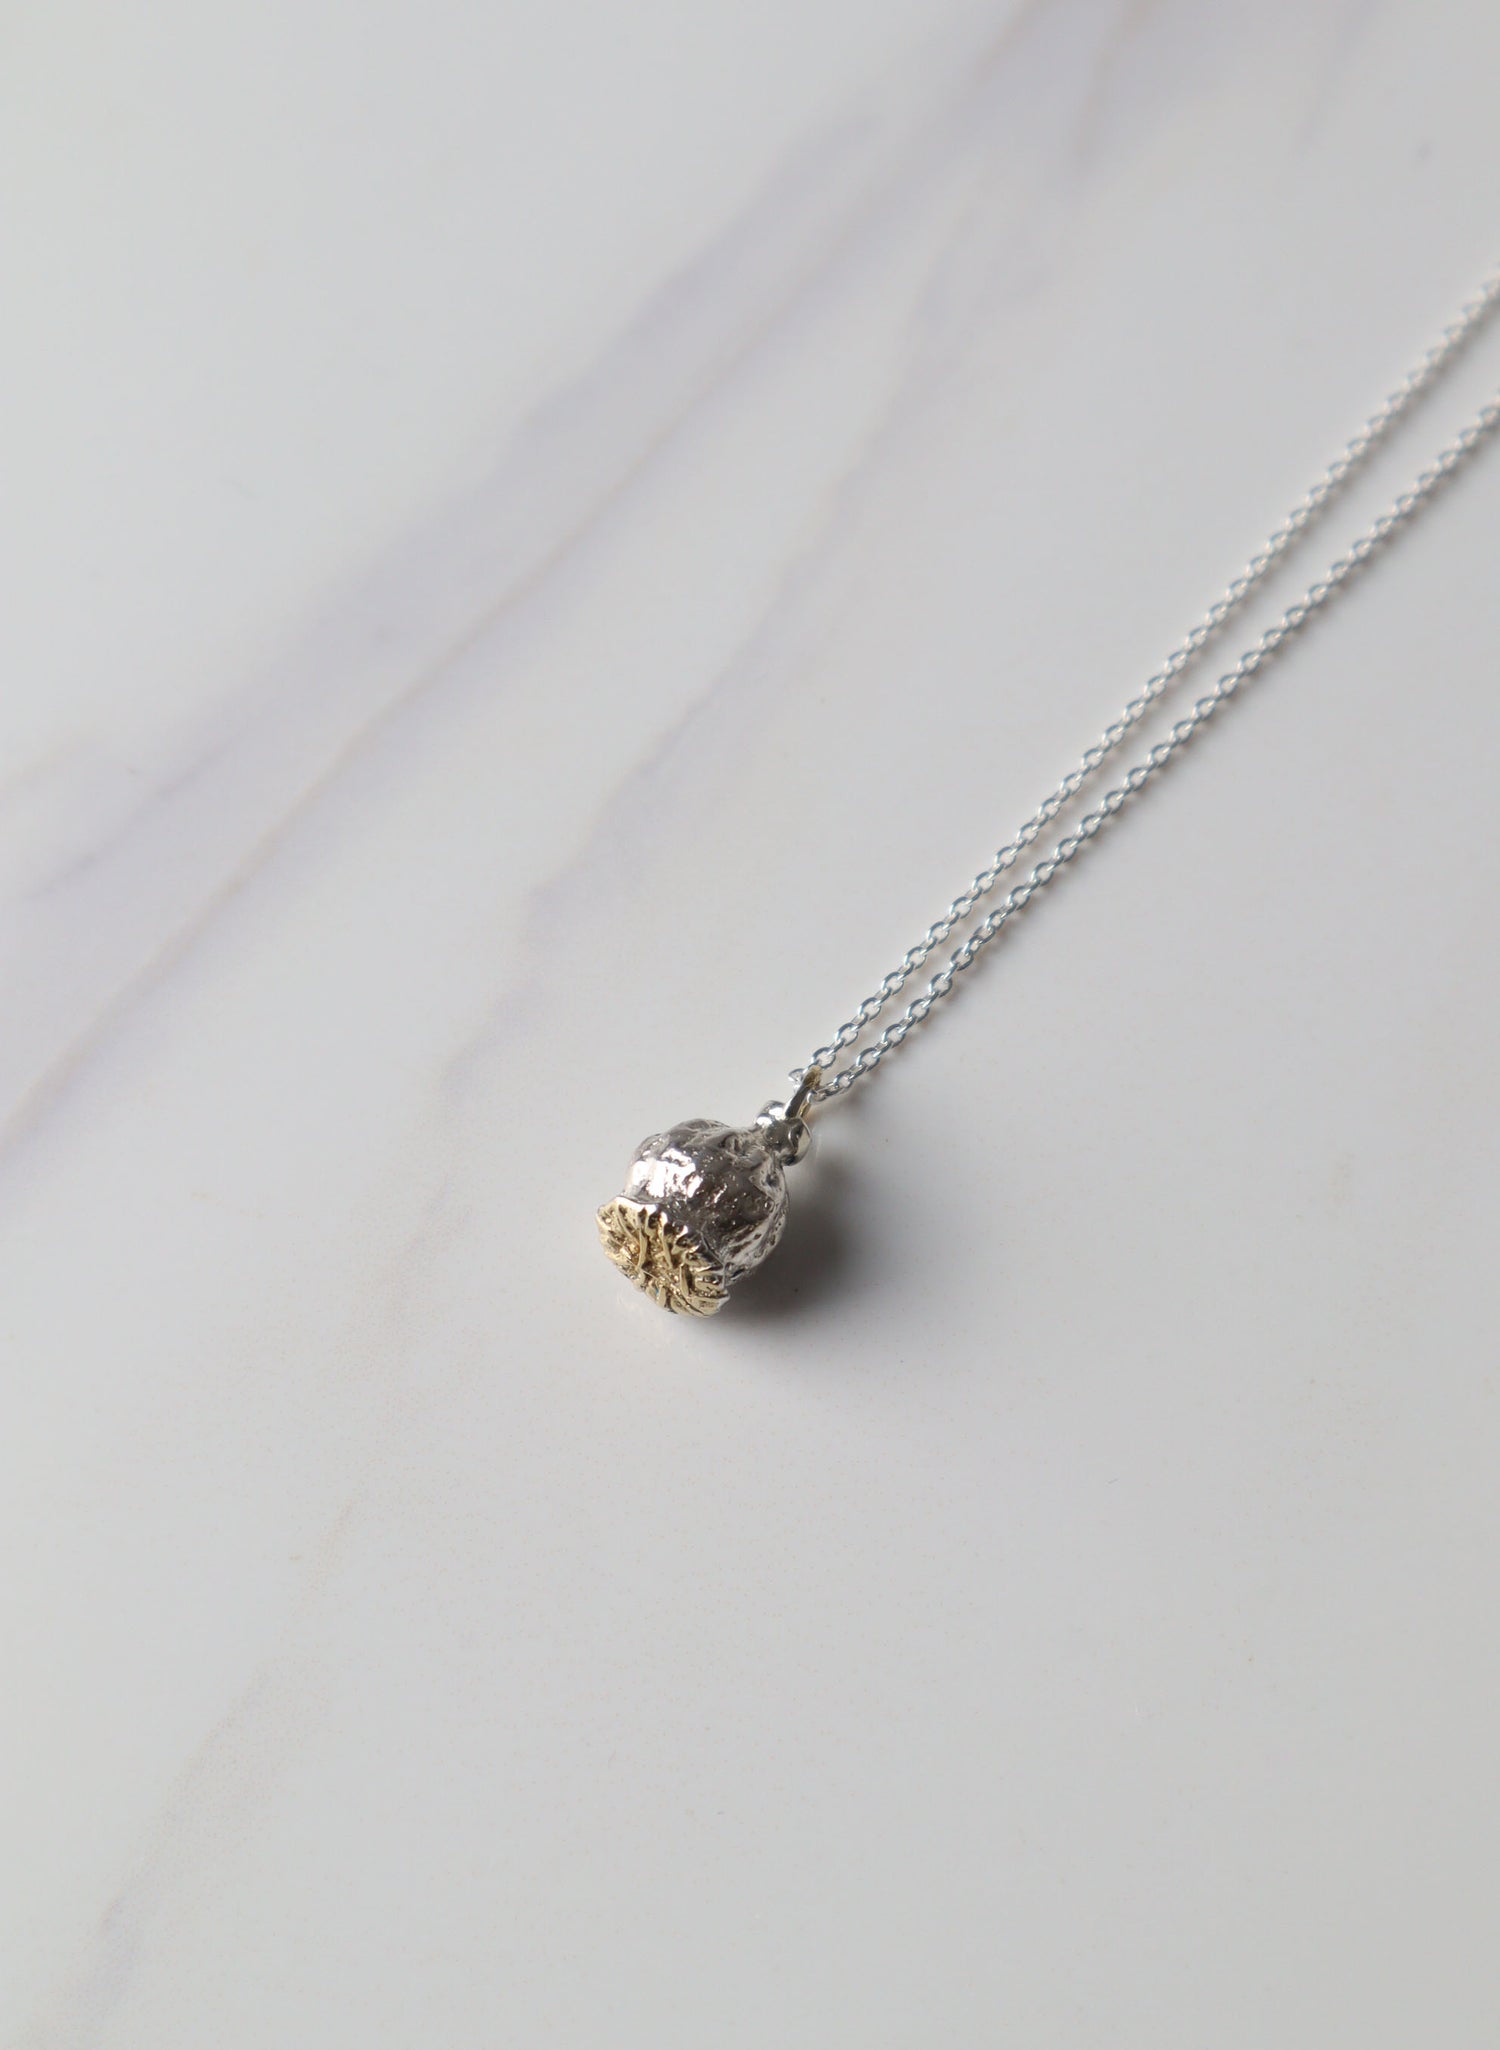 ANZAC Poppy Necklace - Stirling Silver and Gold Plate